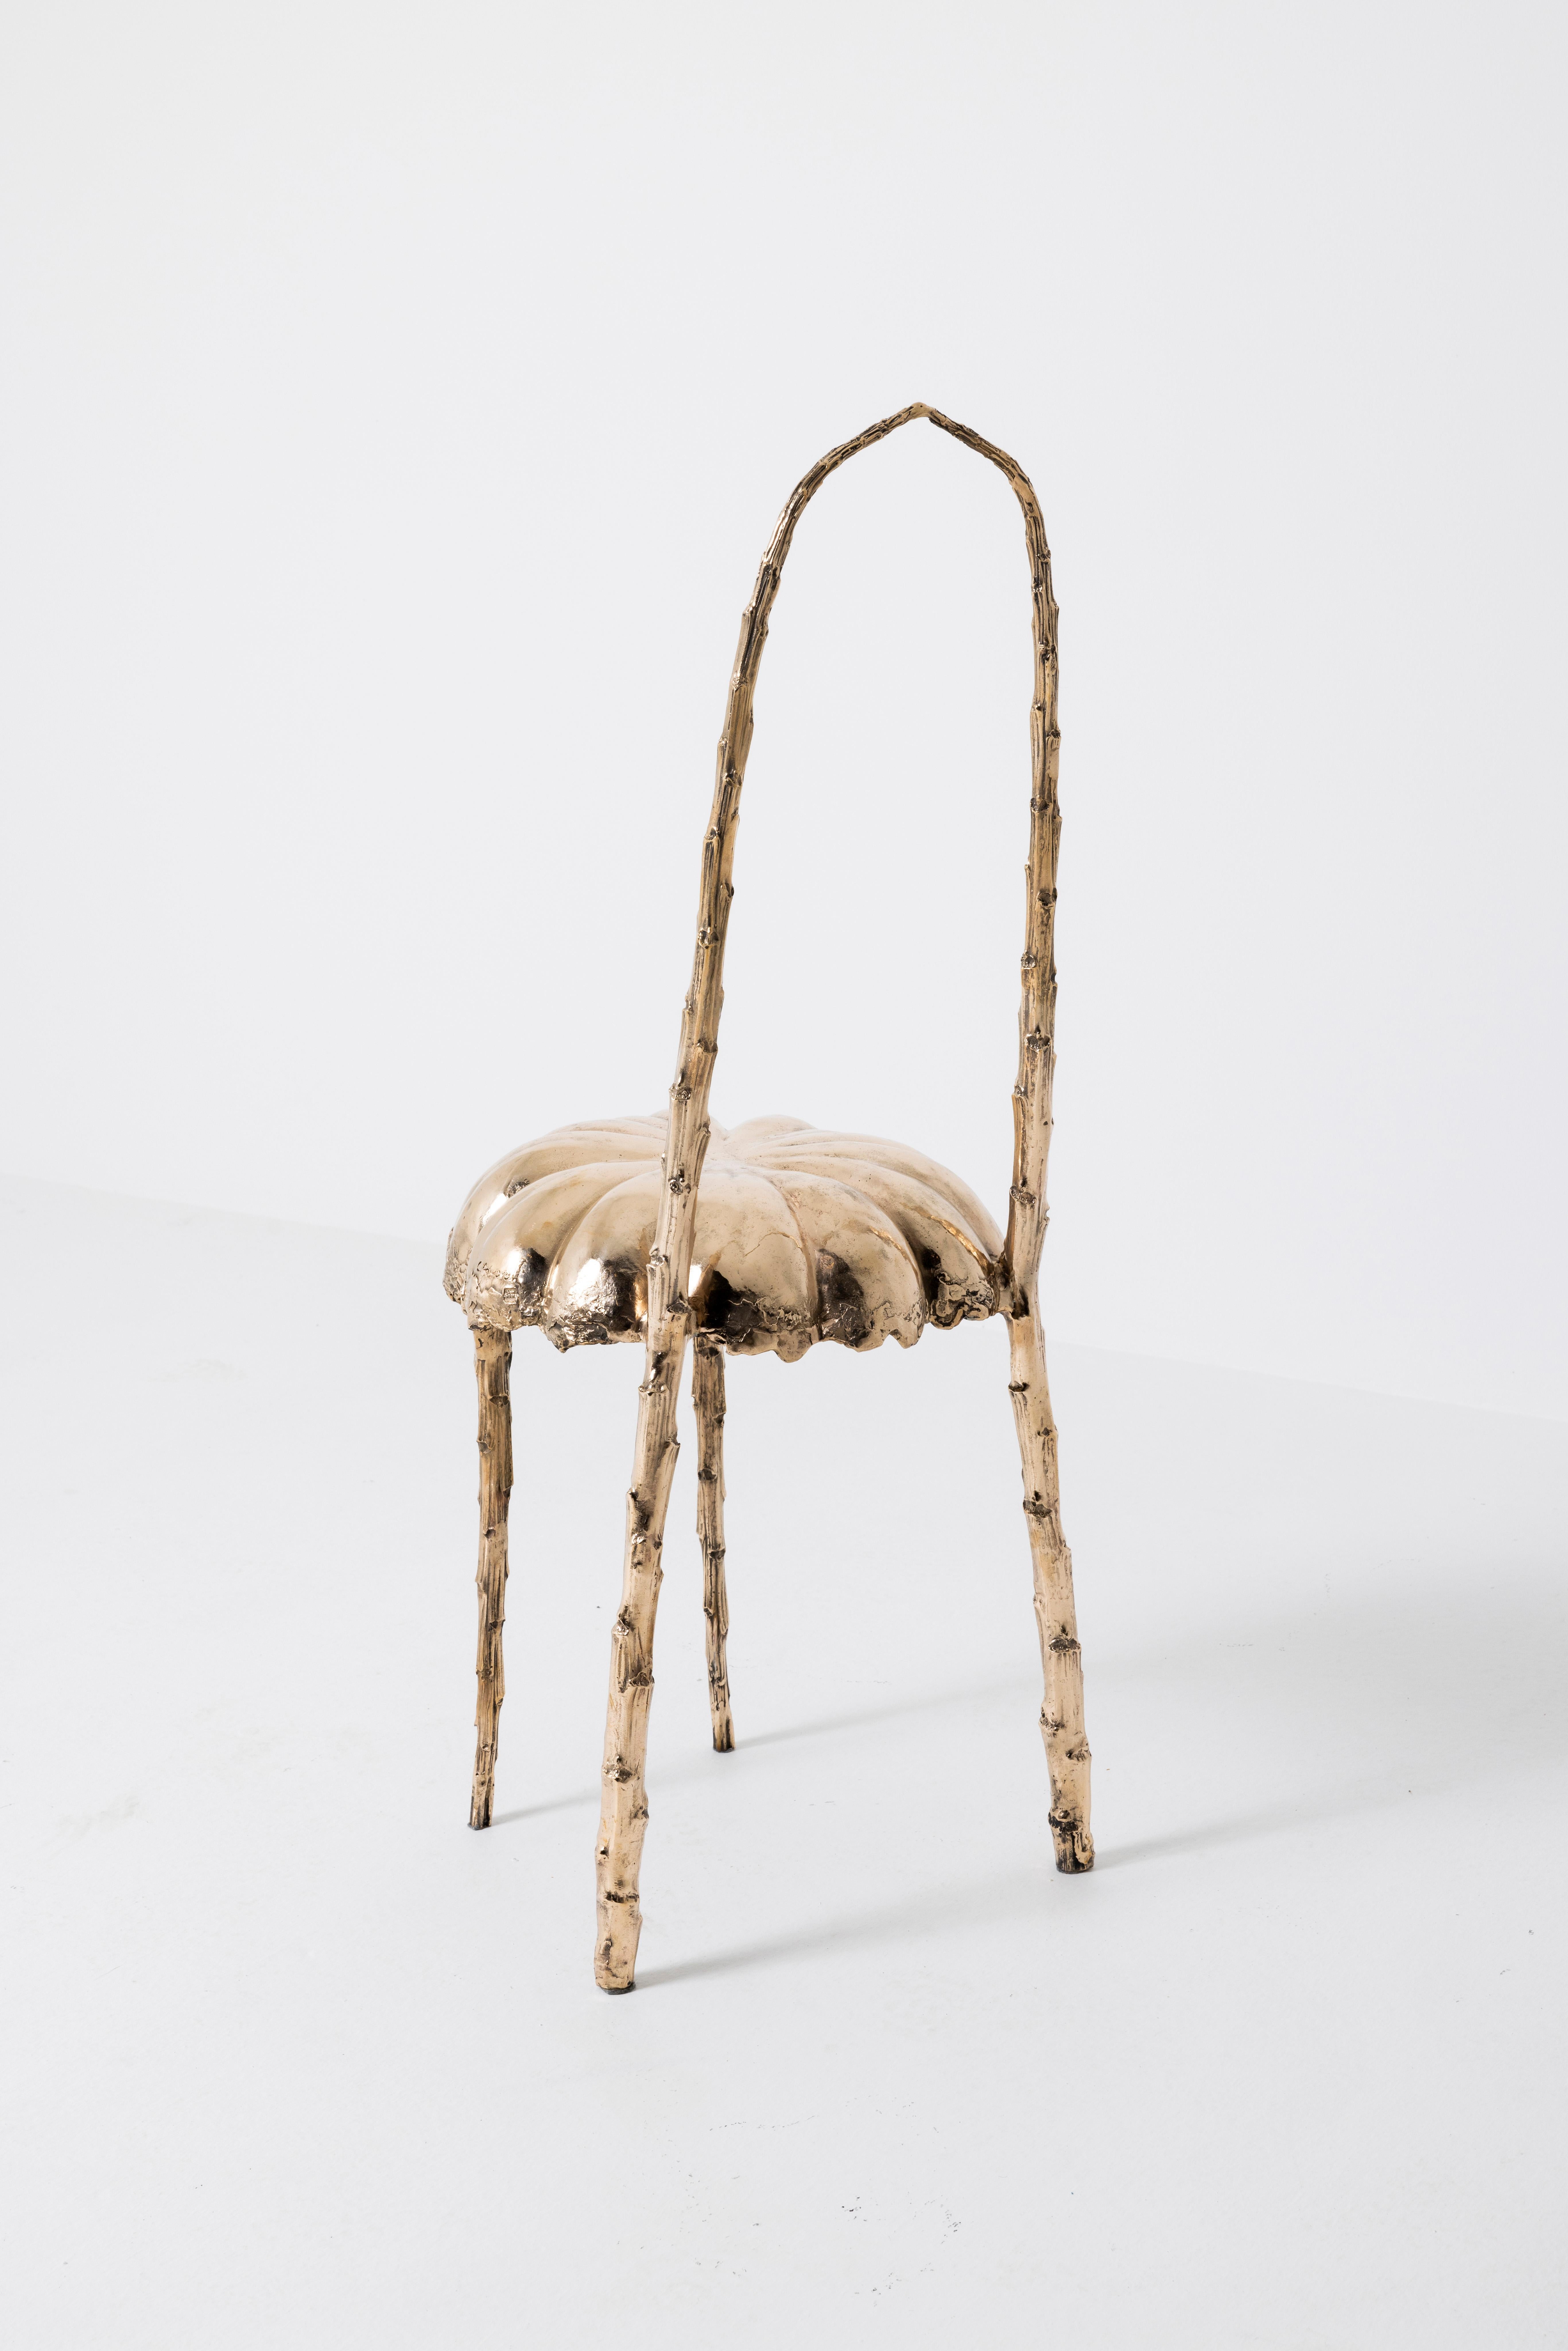 Hand-Crafted Contemporary Bronze Jellyfish Chair by Clotilde Ancarani For Sale